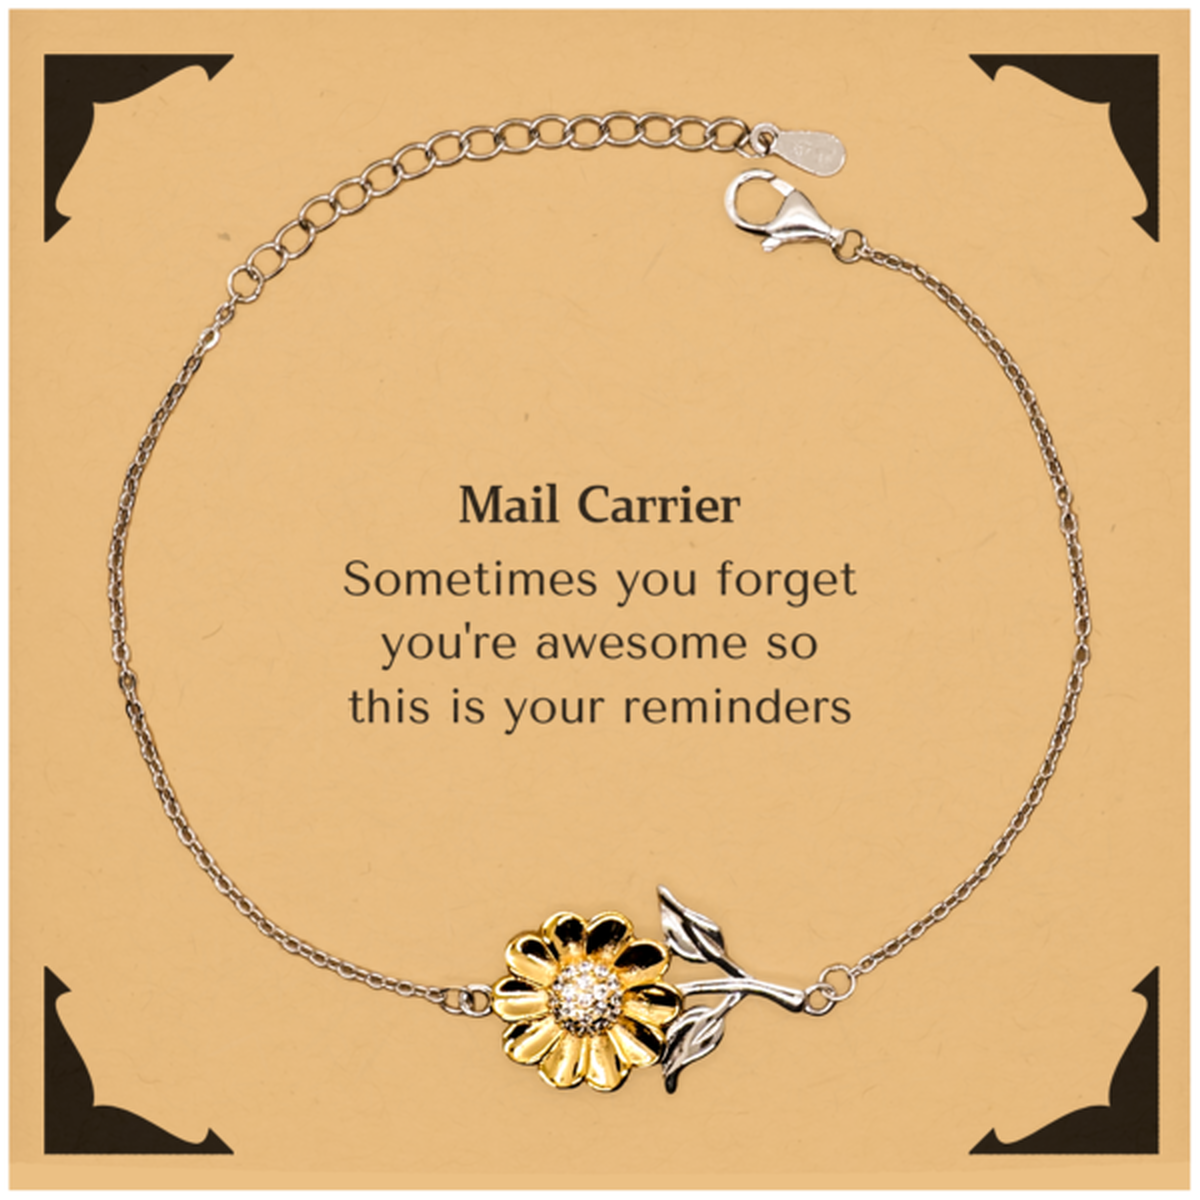 Sentimental Mail Carrier Sunflower Bracelet, Mail Carrier Sometimes you forget you're awesome so this is your reminders, Graduation Christmas Birthday Gifts for Mail Carrier, Men, Women, Coworkers